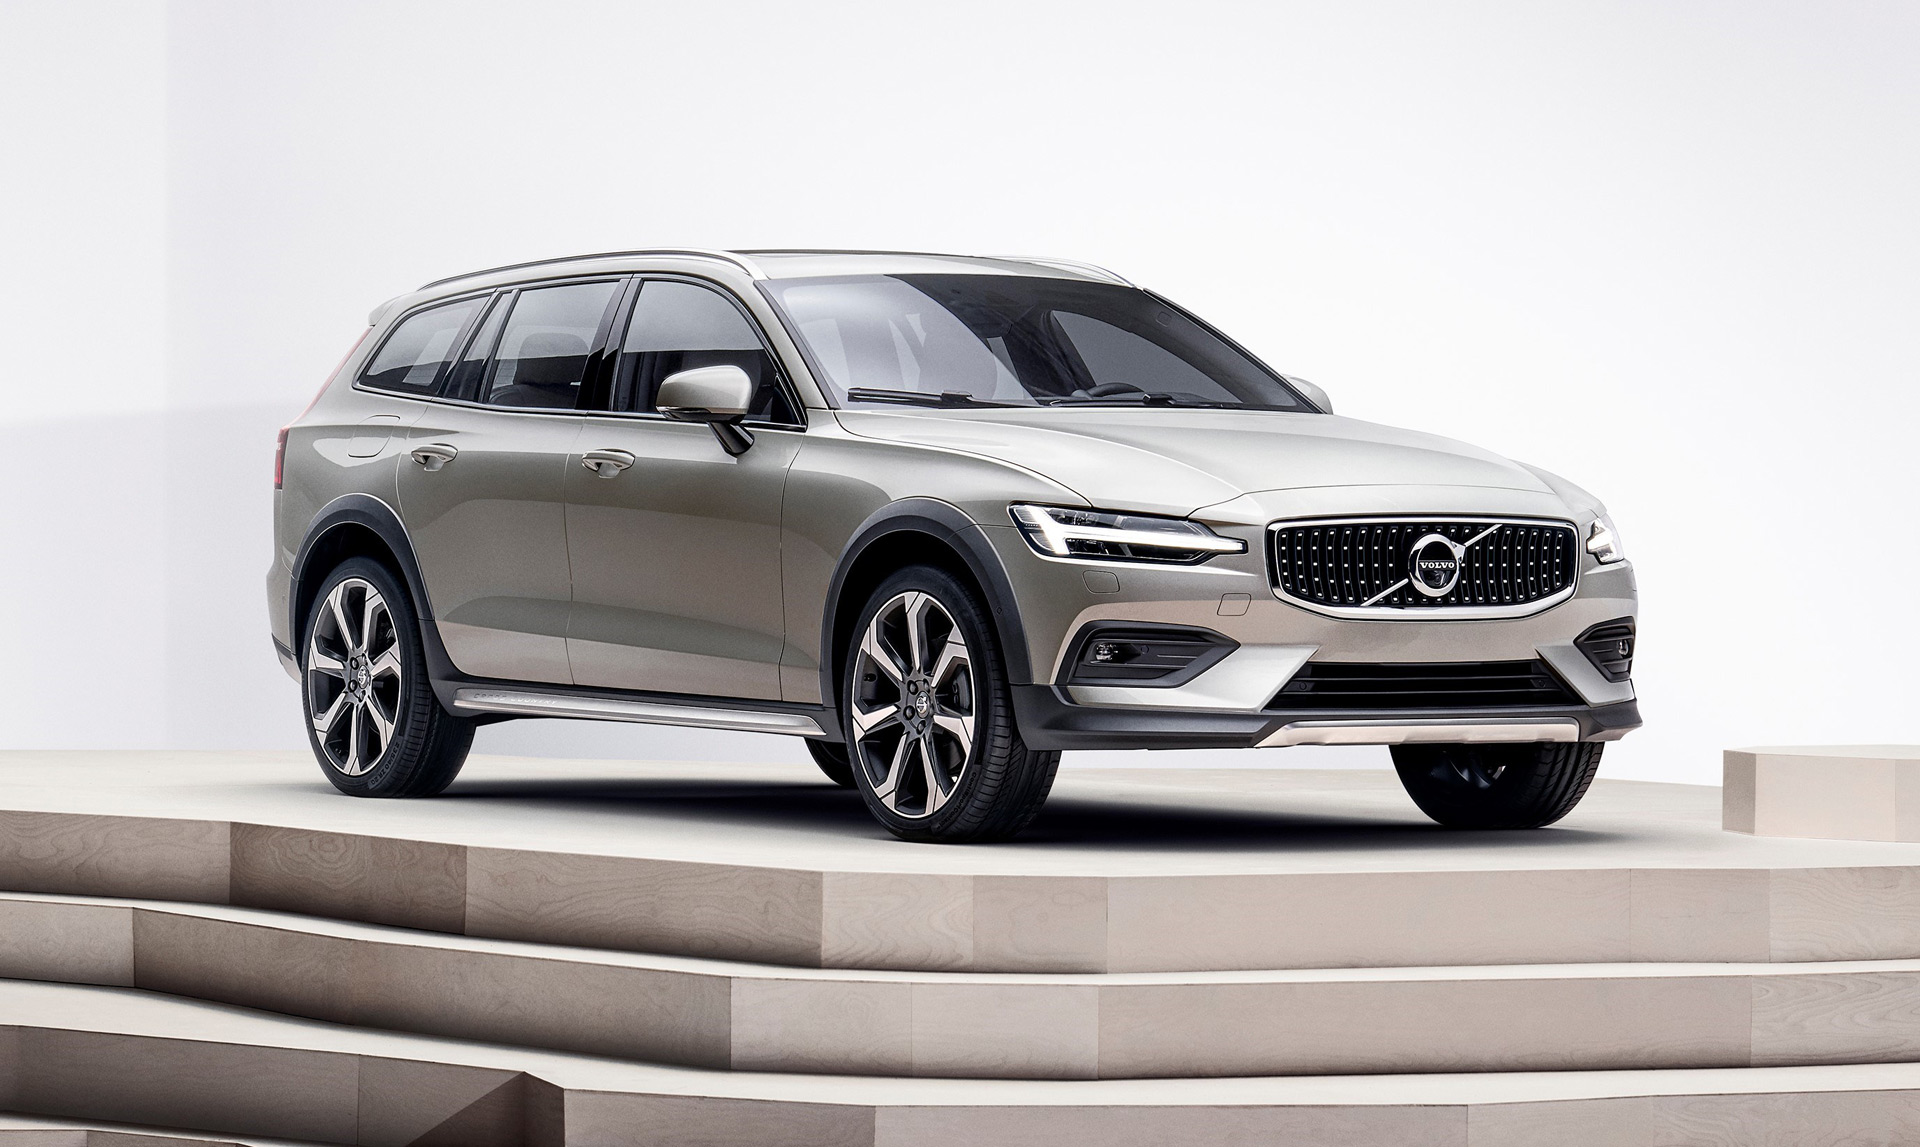 2019 Volvo V60 Cross Country first look: Sultry Swede on stilts